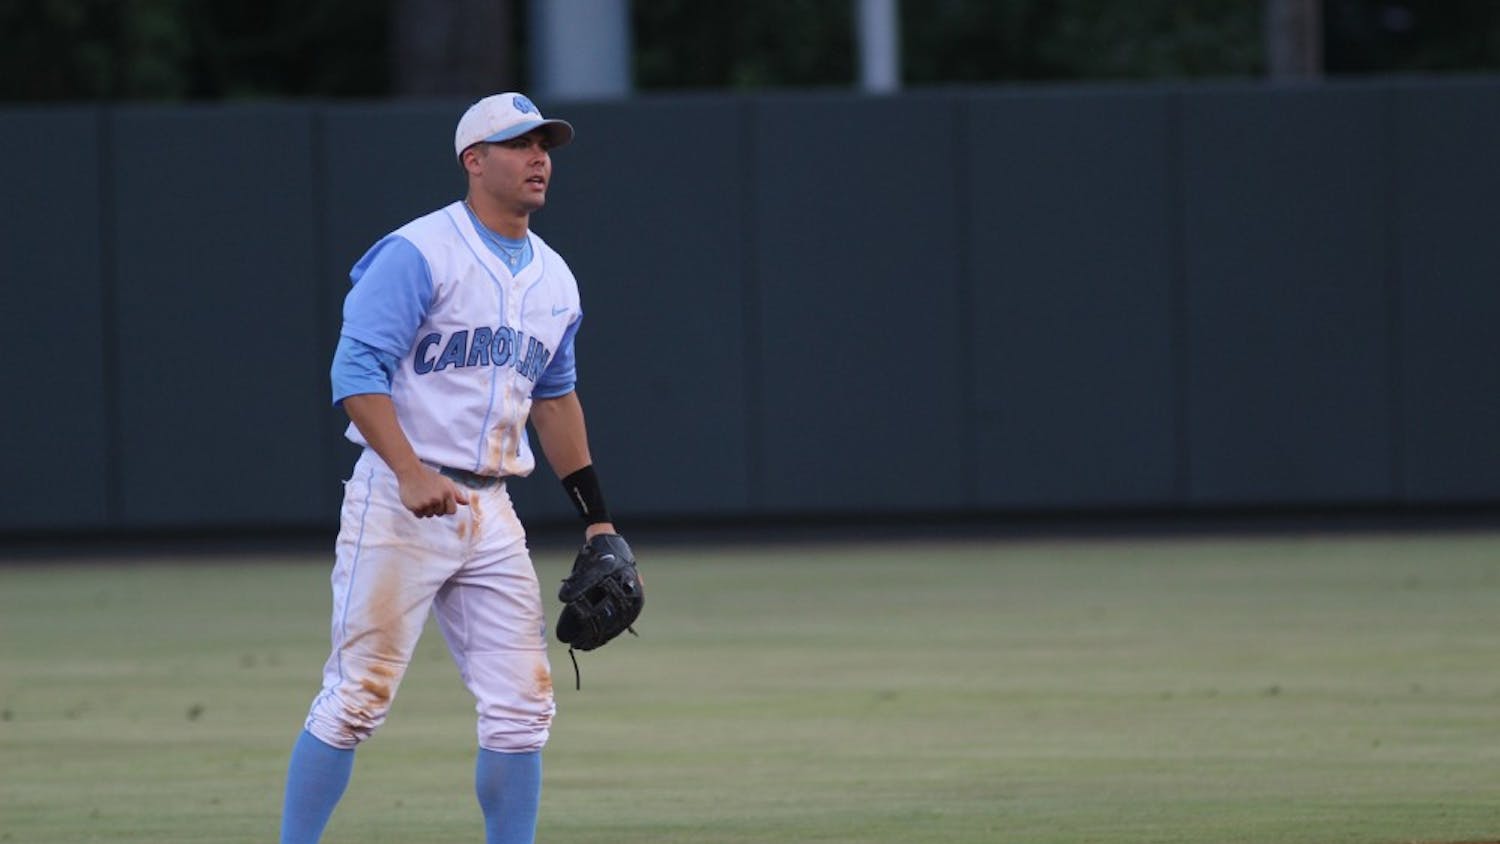 Photo: UNC baseball to host Stanford in NCAA super regionals (Christopher Lane)